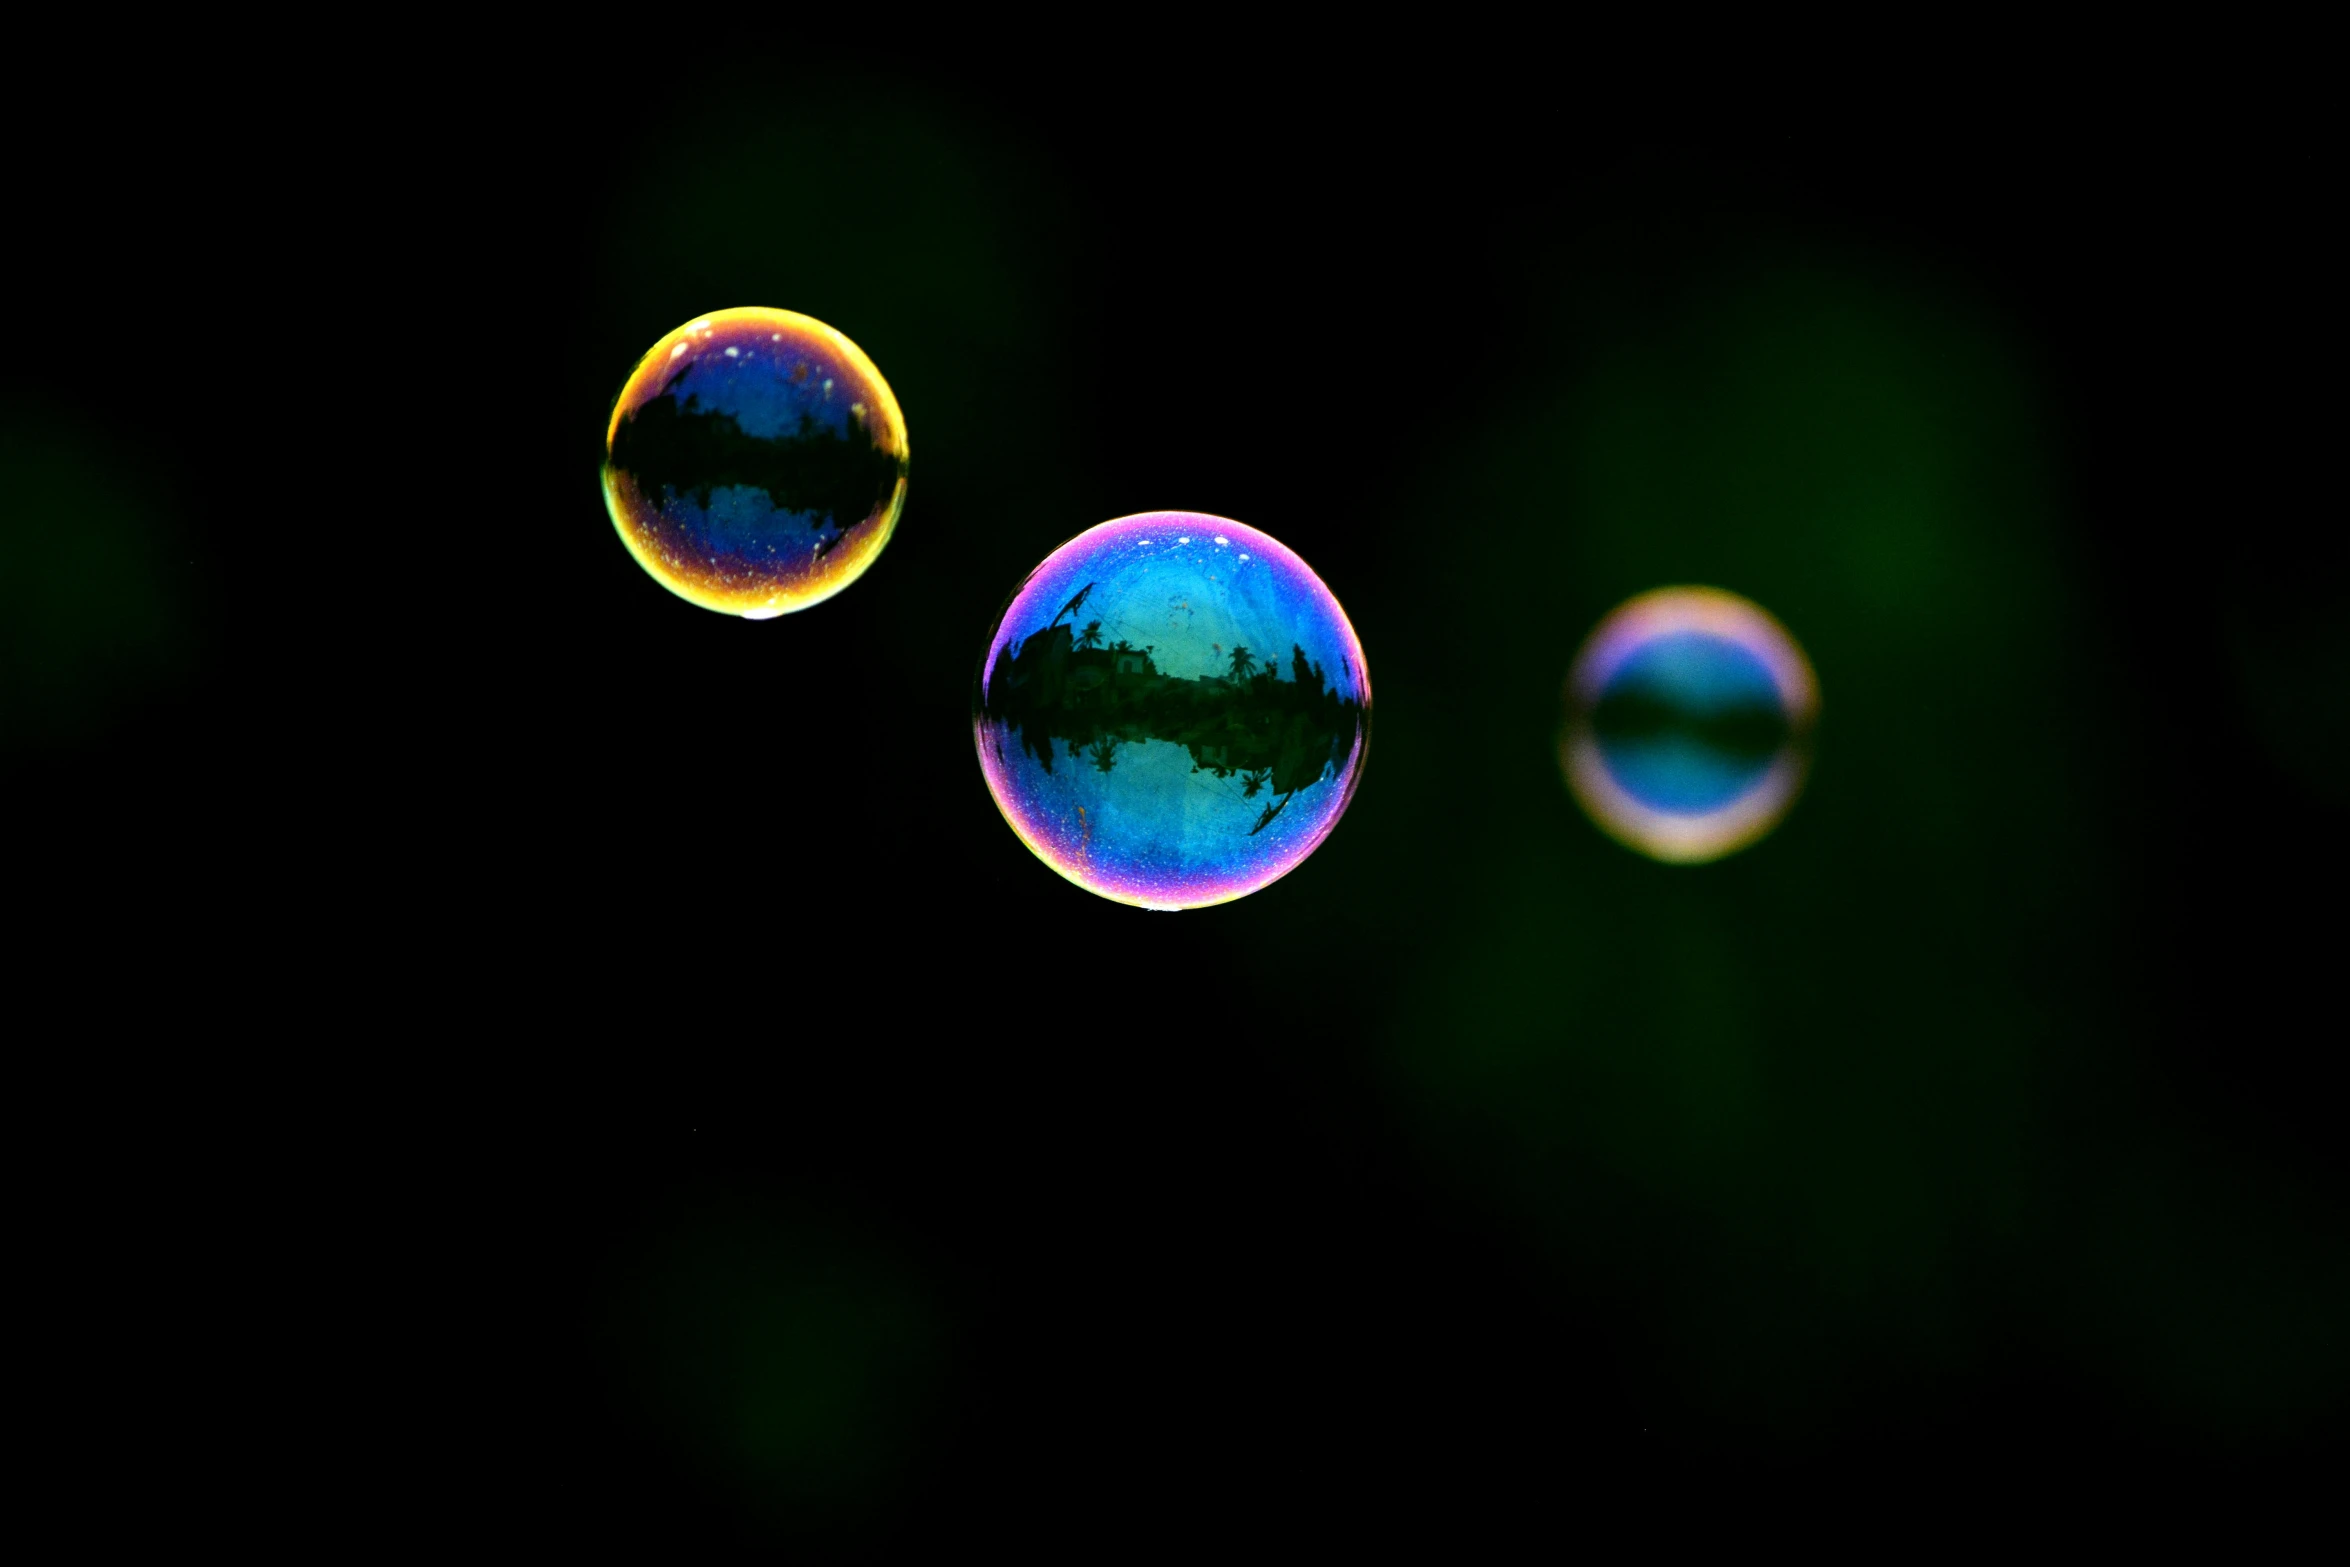 a picture of three soap bubbles being flown in the dark